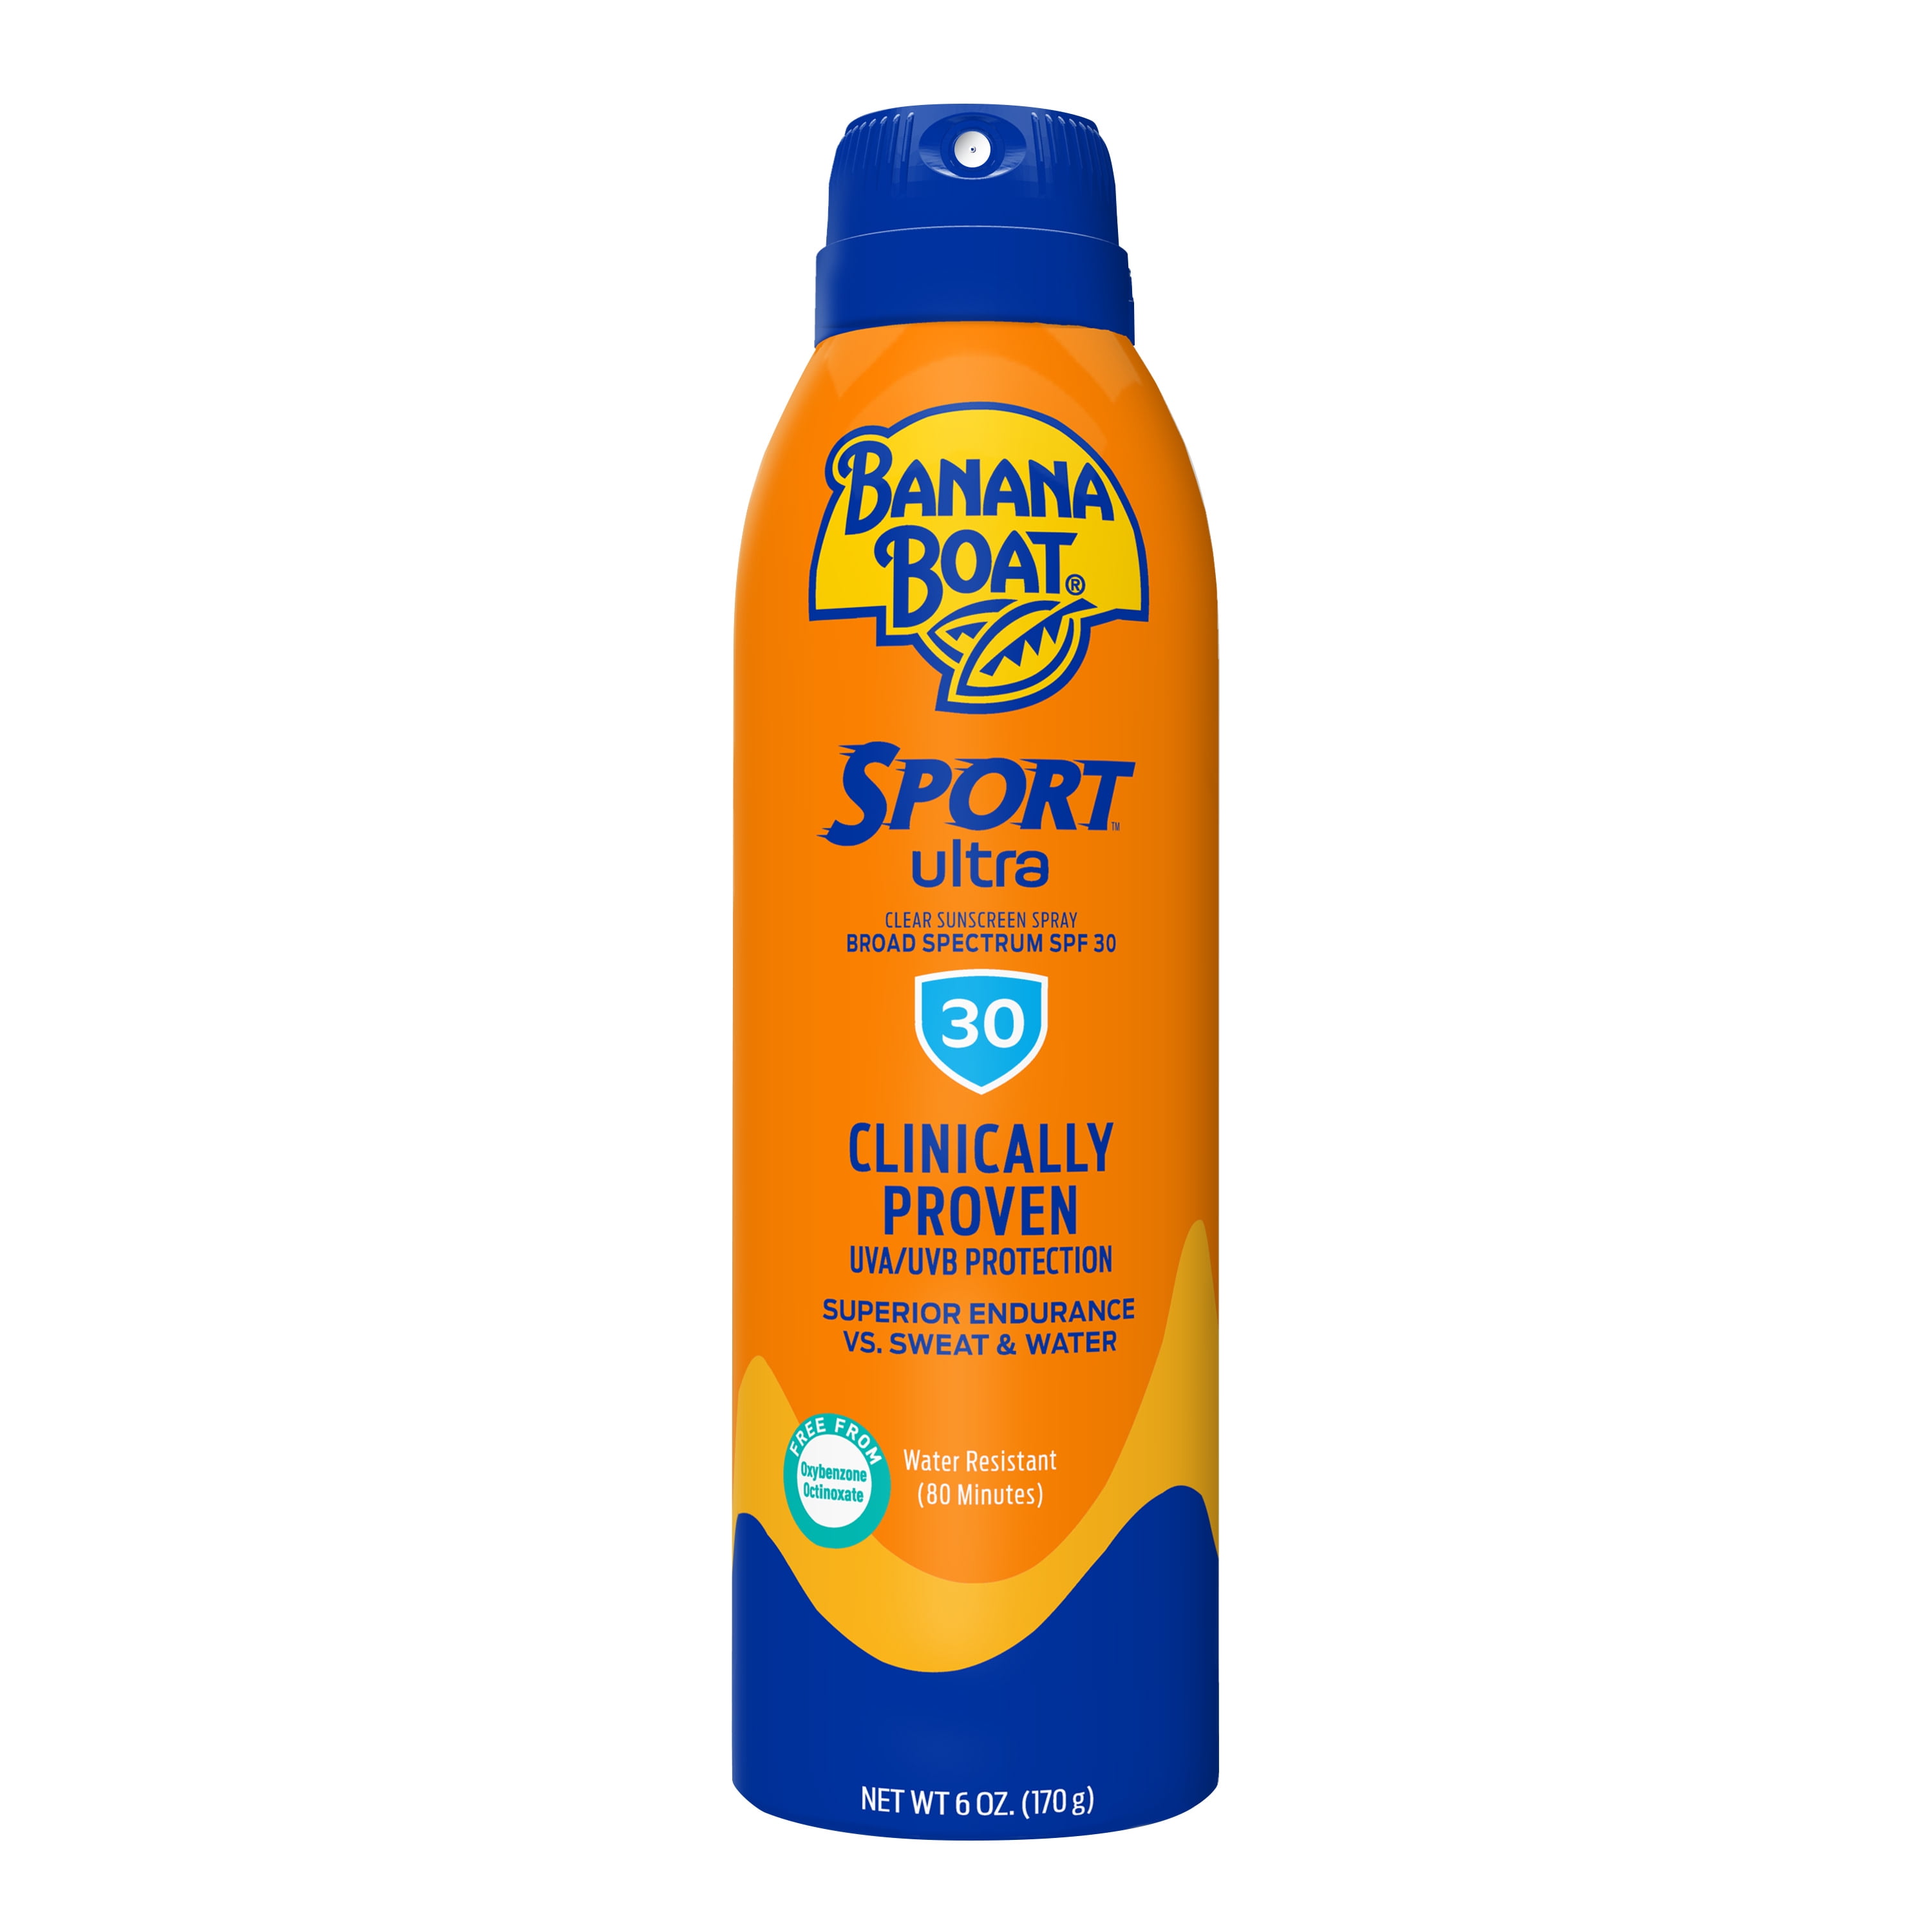 Banana Boat Sport Ultra Sunscreen Spray 6 Oz, 30 SPF, Water Resistant Sunblock (80 Minutes), Superior Endurance VS Sweat And Water